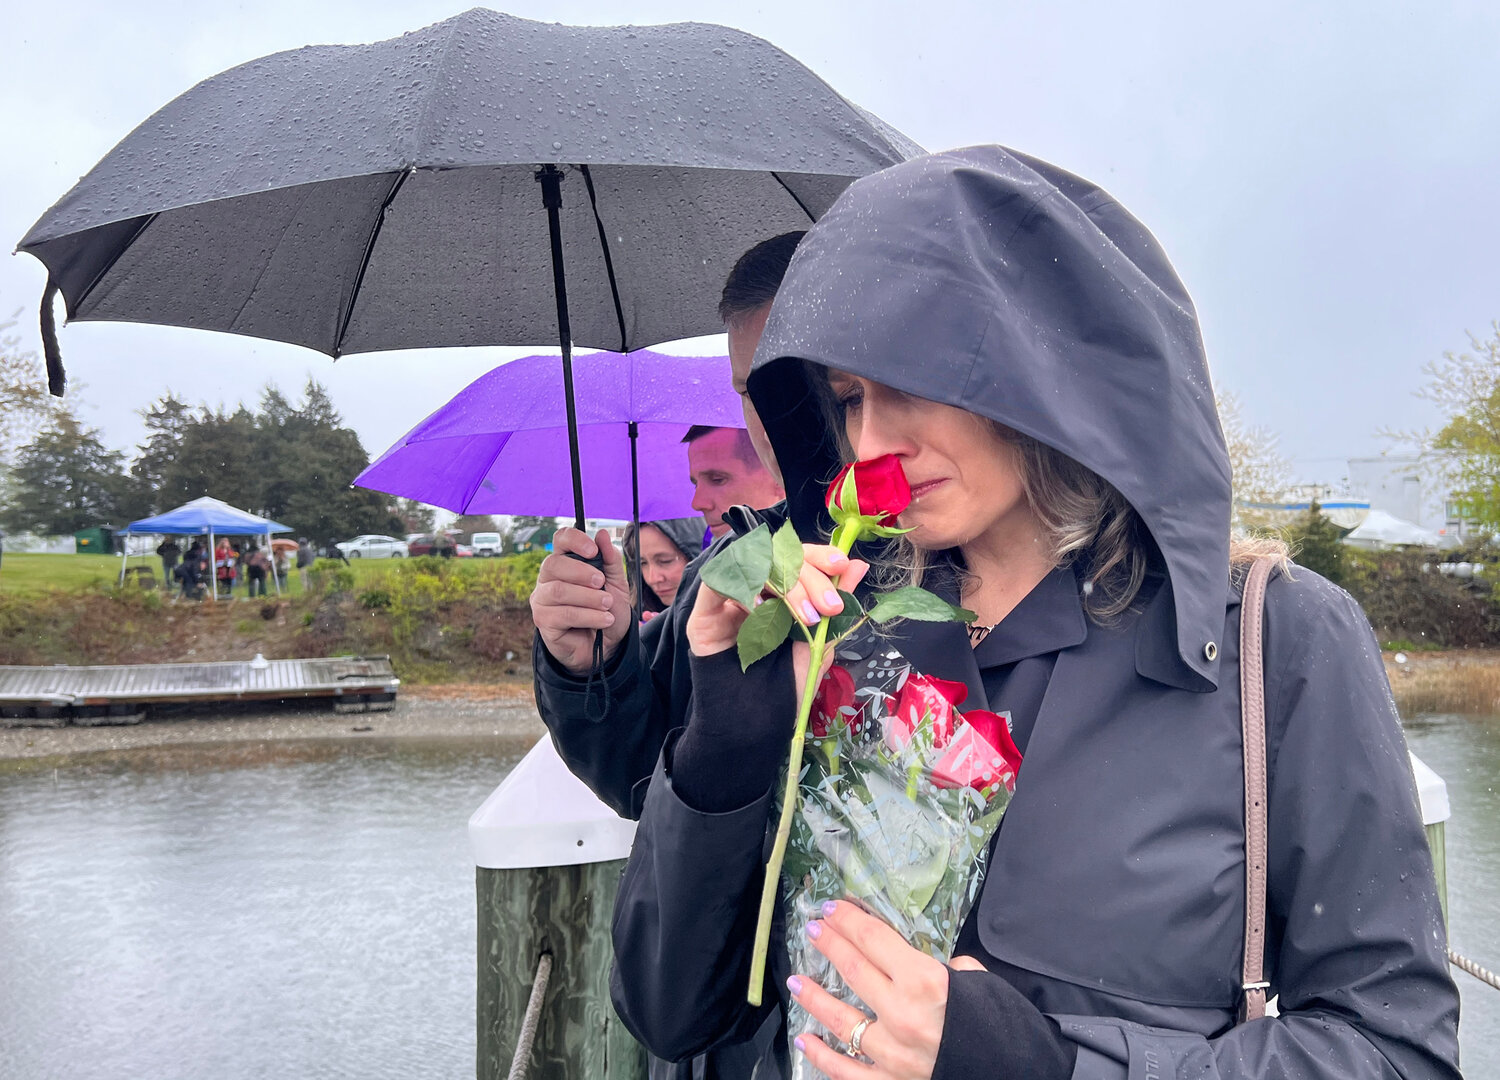 Shannon Watson sniffs a rose before tossing it into Blue Bill Cove Sunday afternoon in memory of her son, Cole, who died at the age of 22 after jumping from the Claiborne Pell Newport Bridge on May 7, 2022. Her husband, Tom, is behind her. They were attending a healing vigil behind Thriving Tree Coffee House in remembrance of those lost to bridge suicide in Rhode Island.